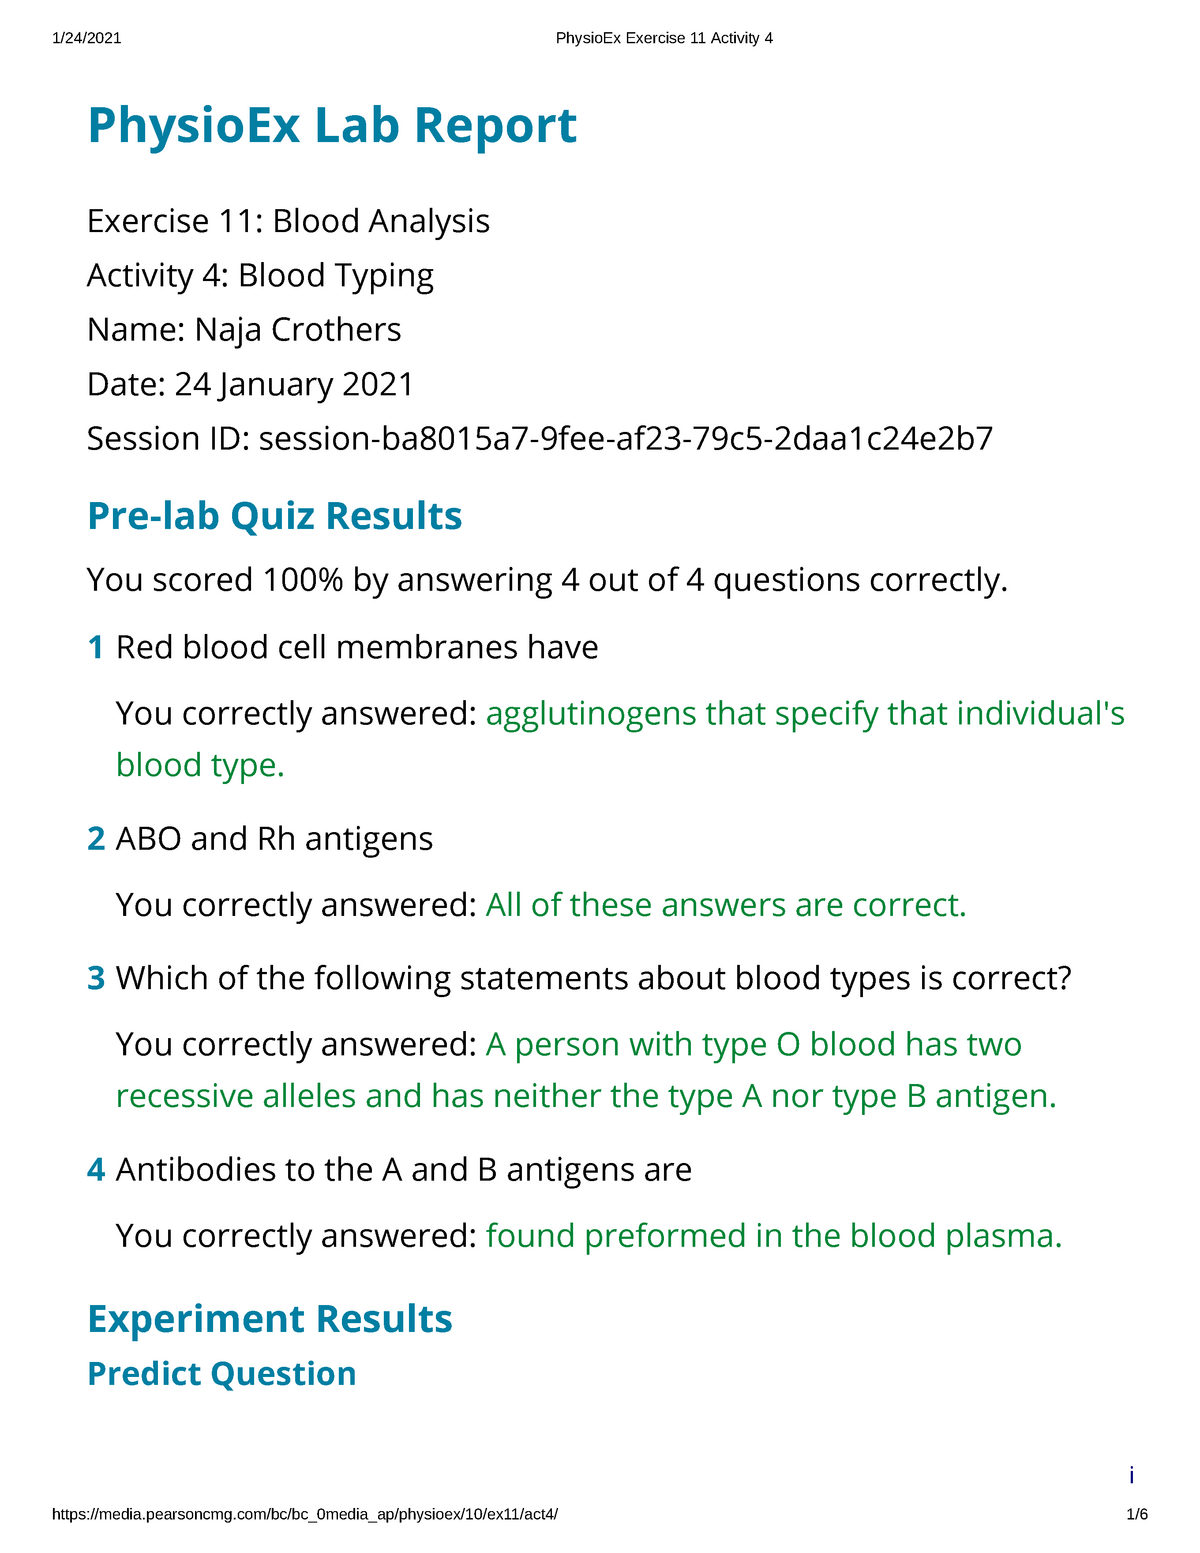 physioex 9.0 exercise 4 activity 3 review sheet answers